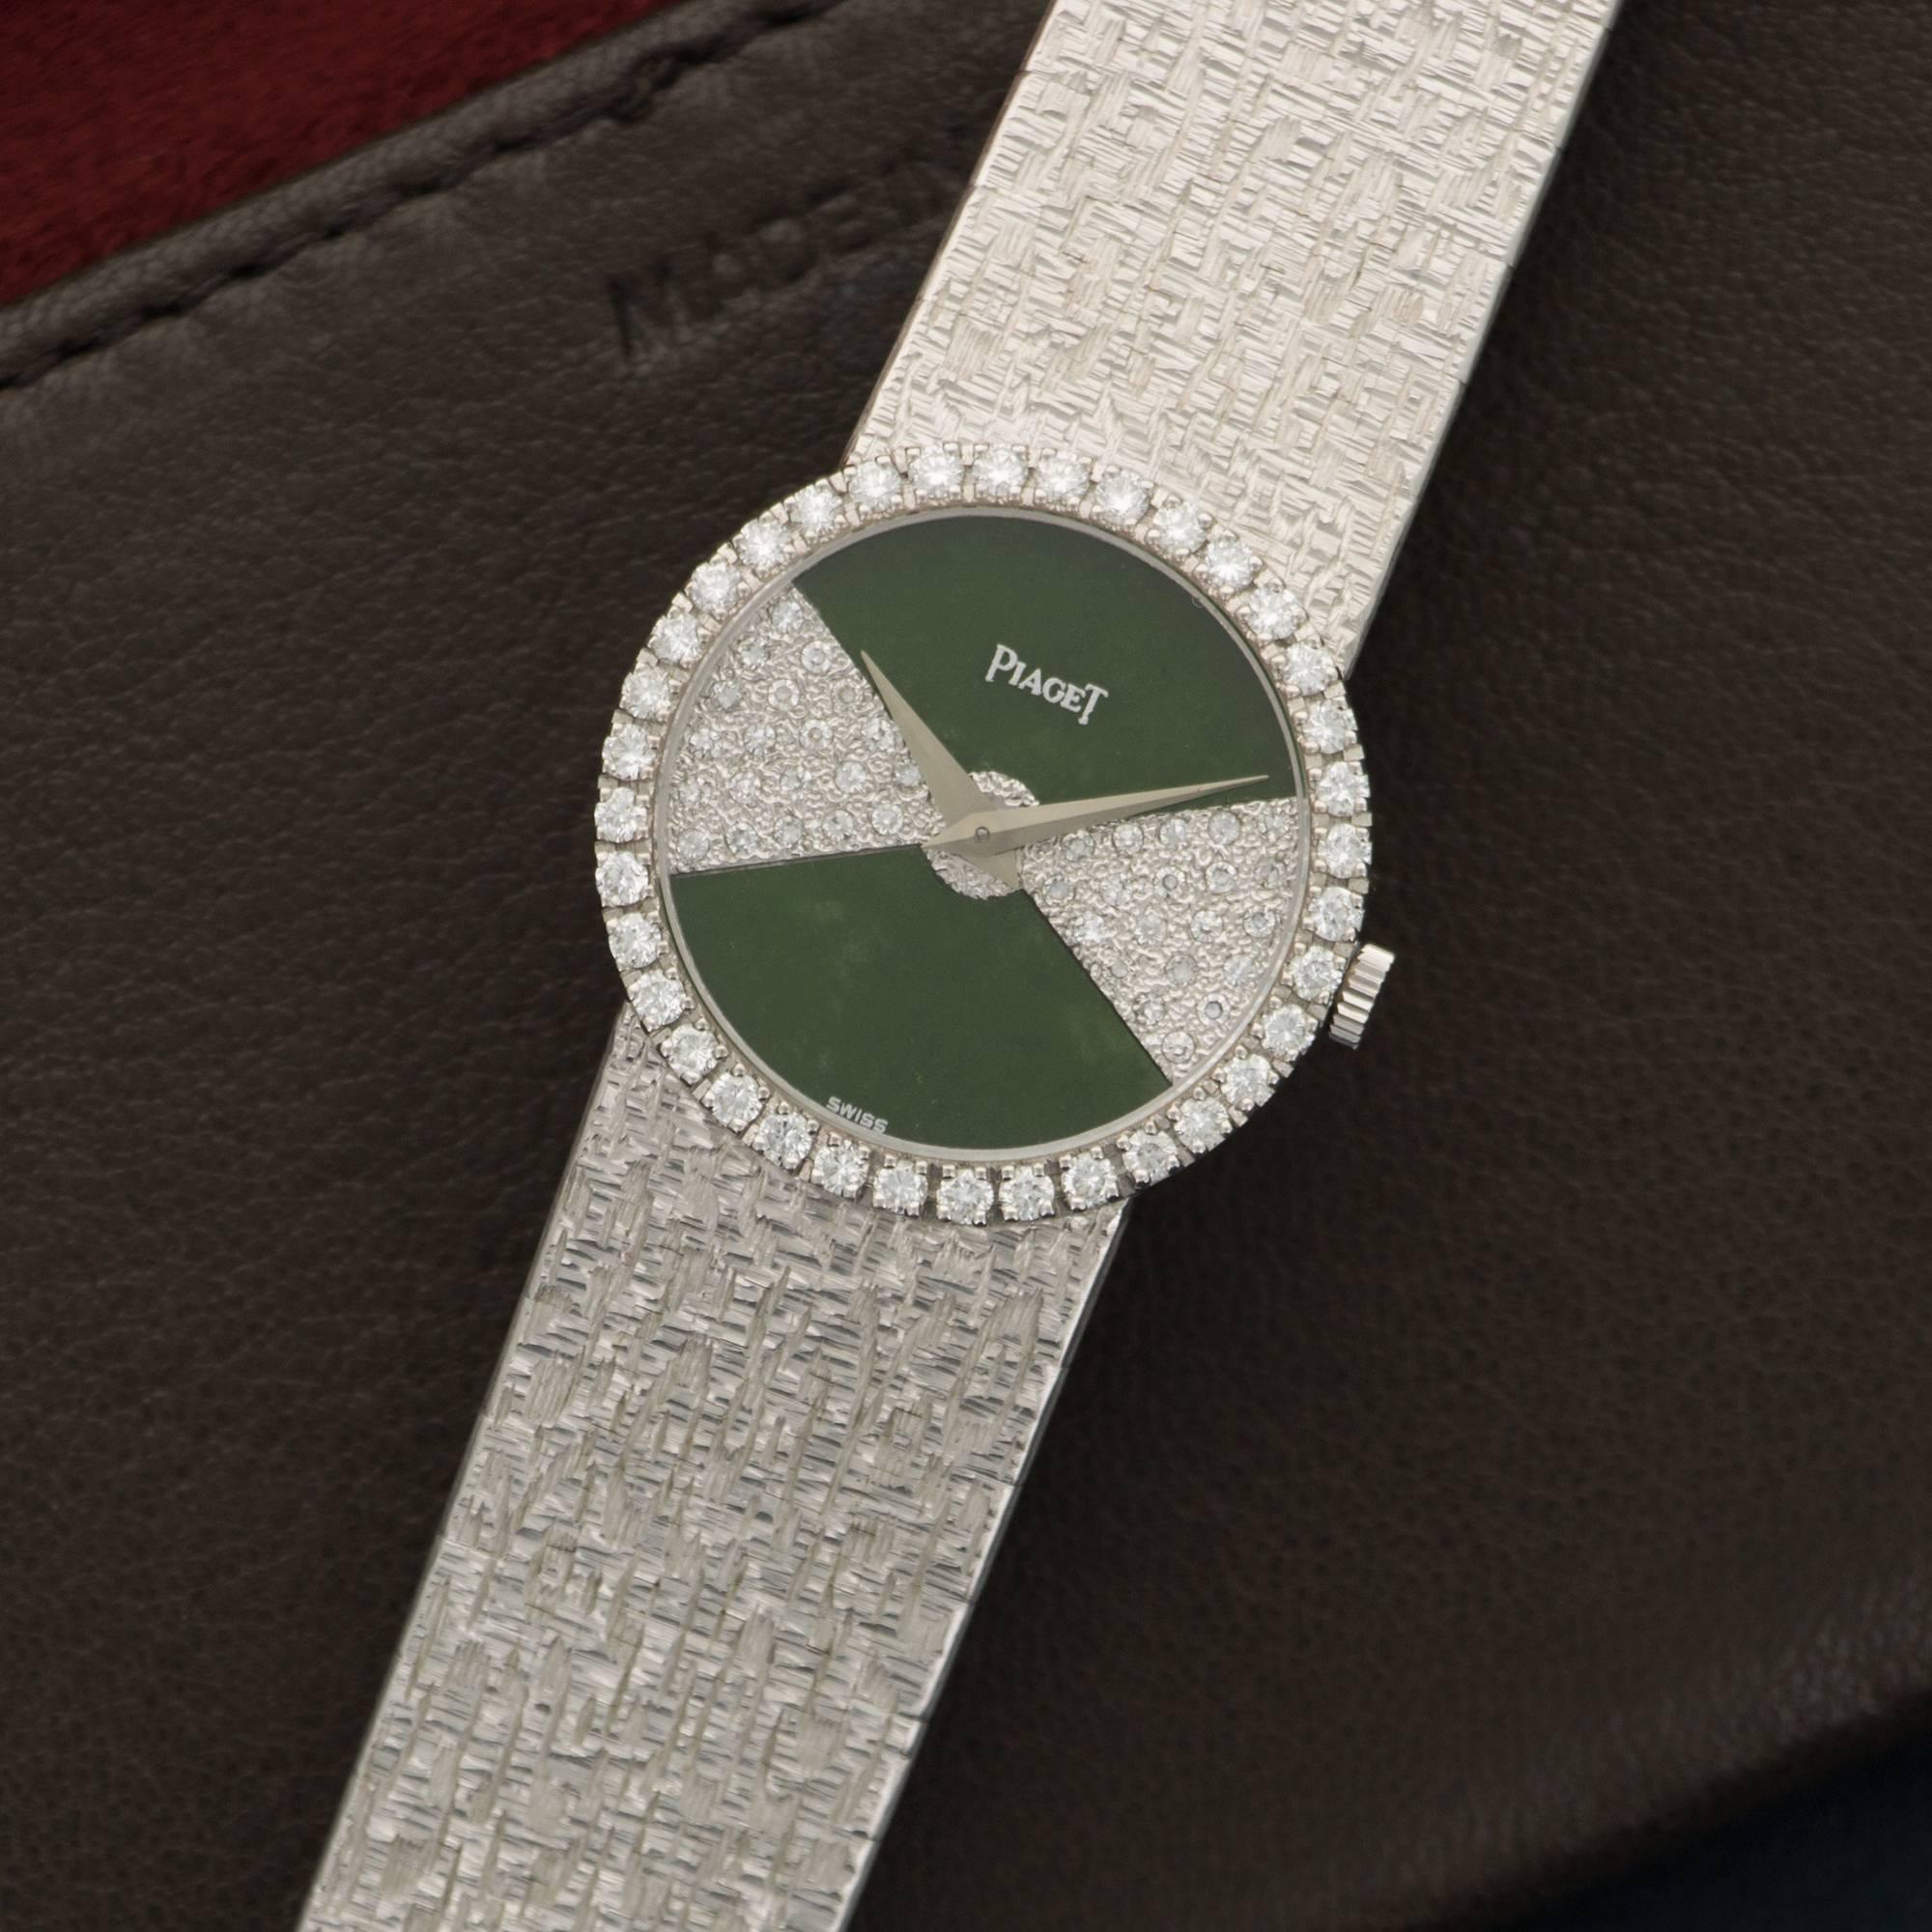 An 18k white gold pave diamond and nephrite jade bracelet watch, by Piaget. Model number 9706. Mechanical winding. 25mm case size. Circa 1970's.